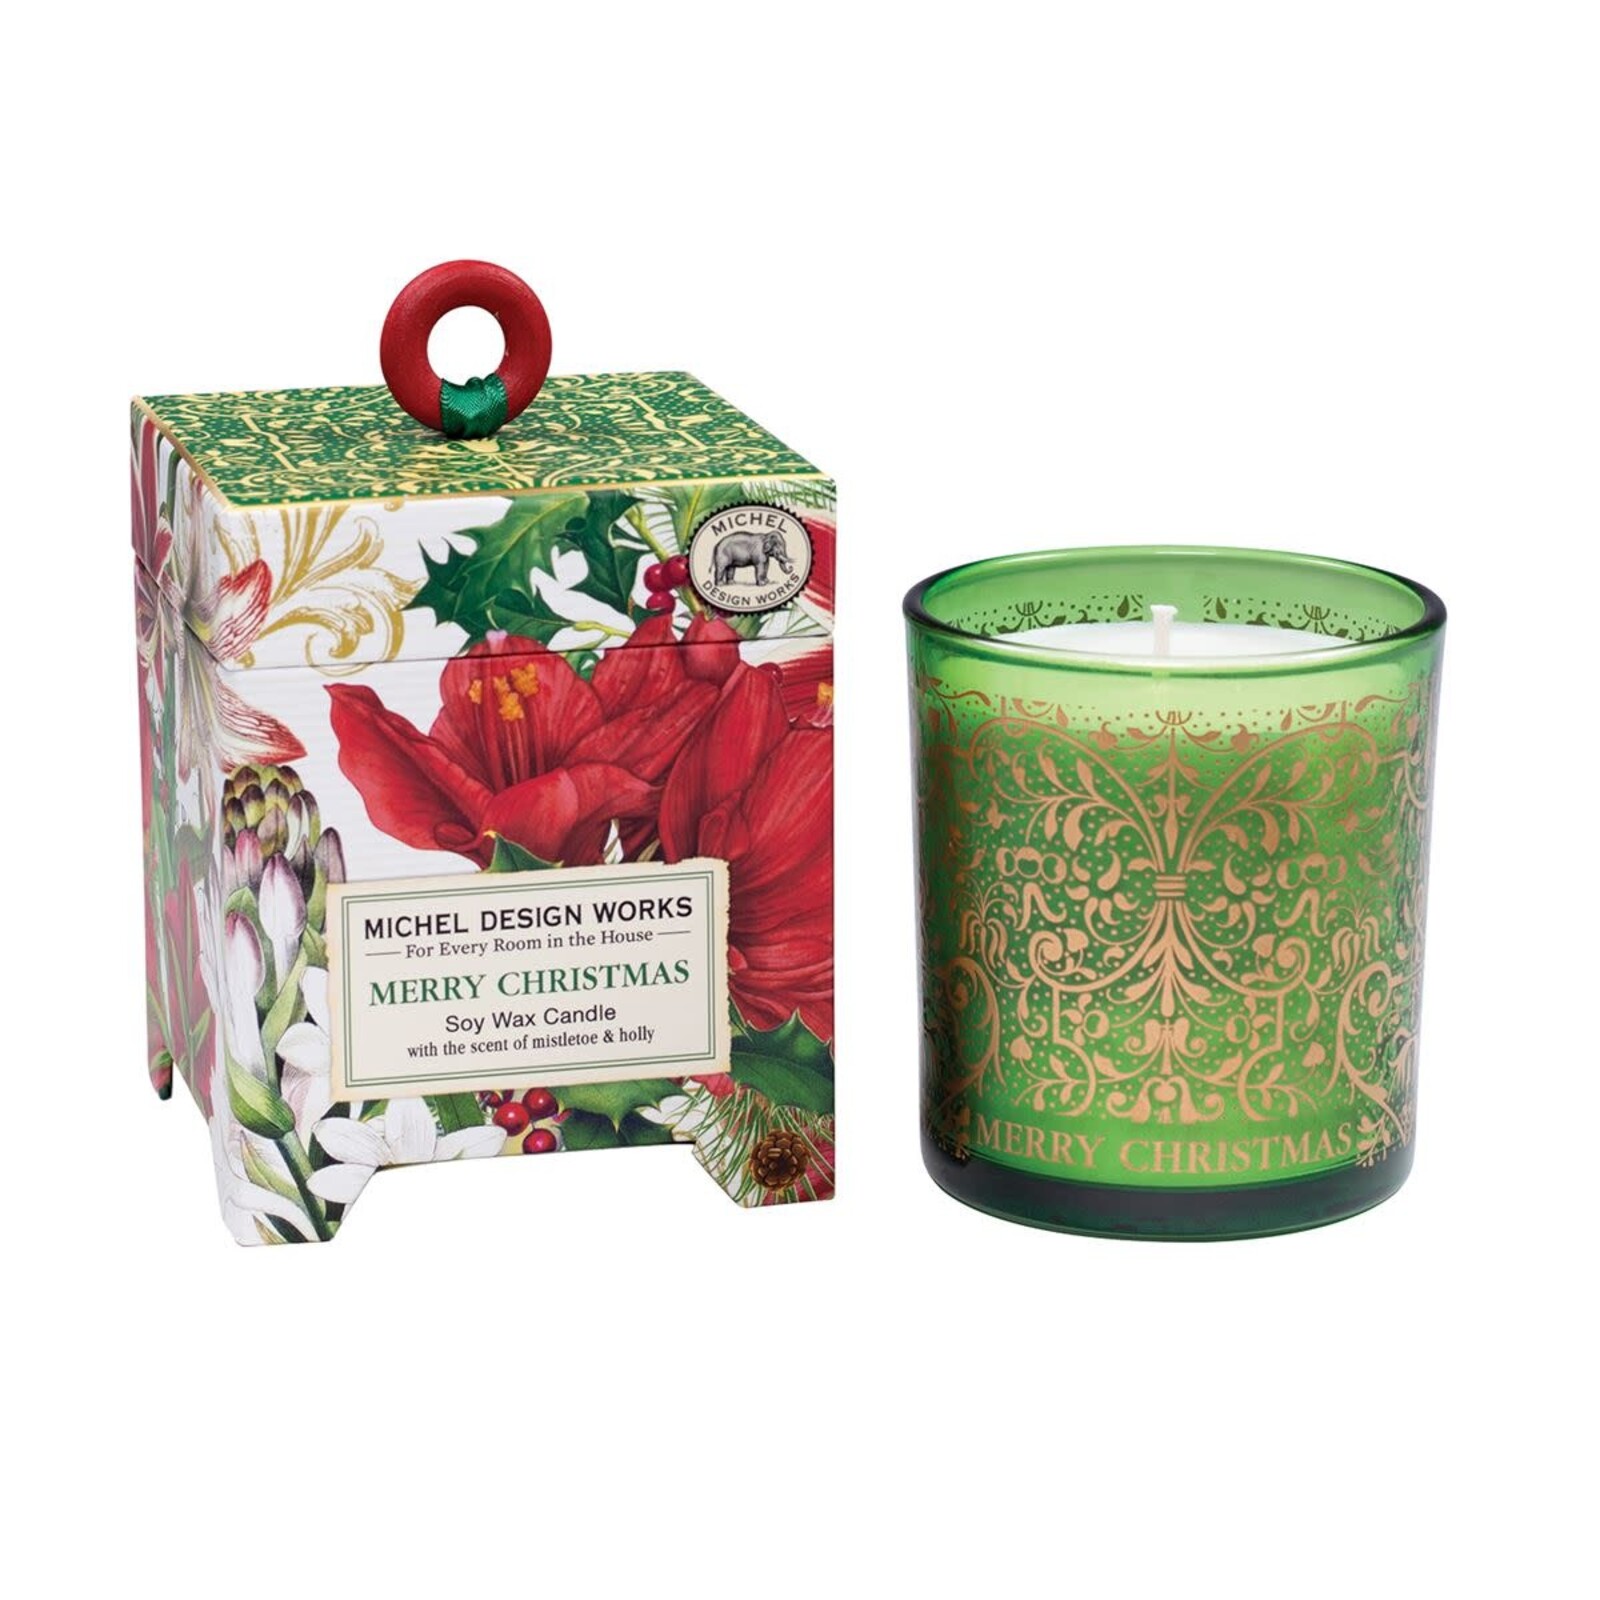 Michel Design Works Merry Christmas 6.5 oz. Soy Wax Candle   CAN346 loading=